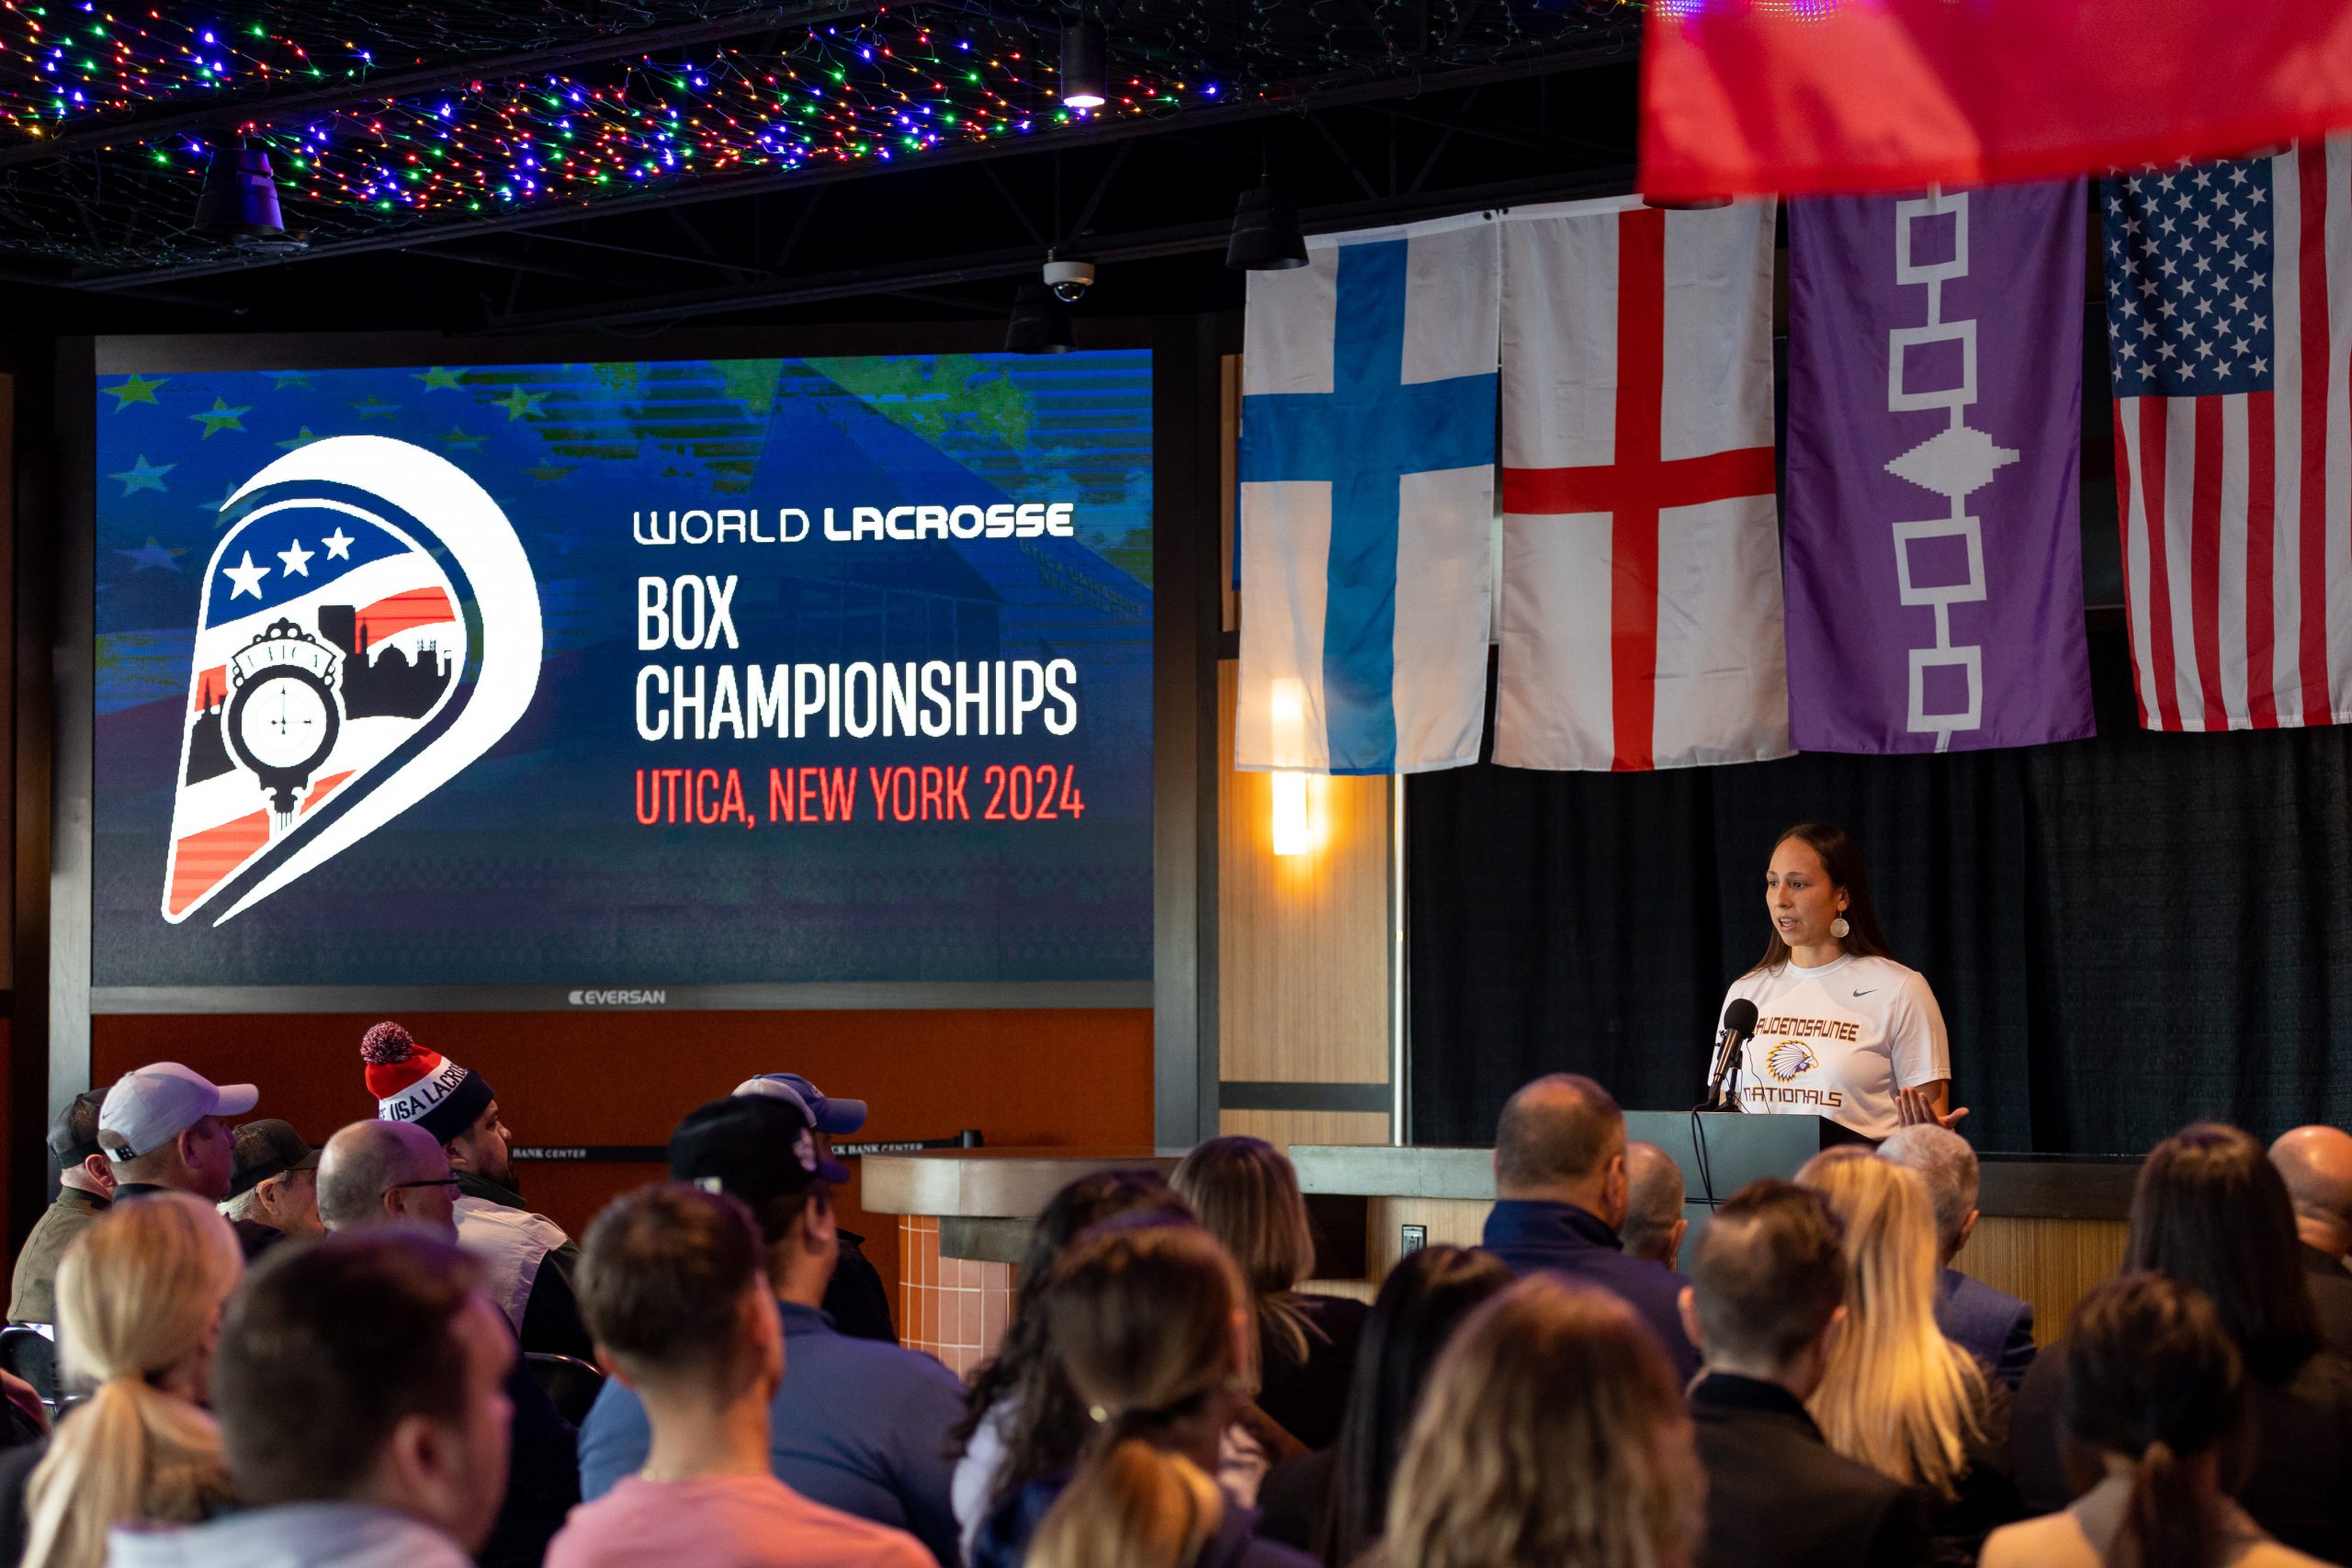 Gallery World Lacrosse awards 2024 Box Championships to Utica, New